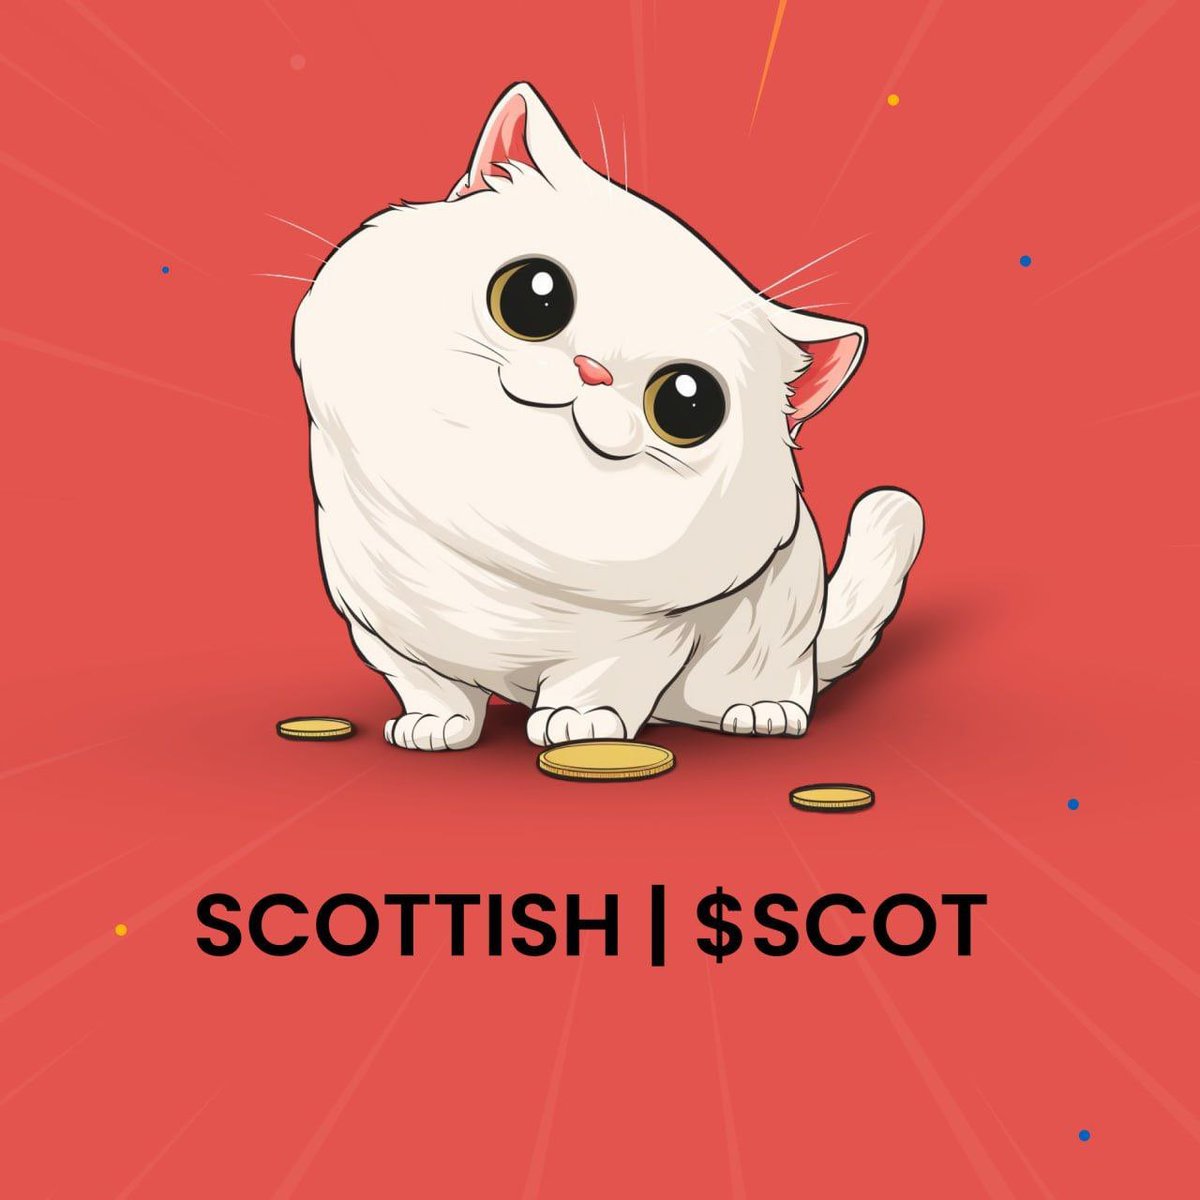 🎙️ SCOT Campaign: 1 Billion Token prize pool,earn 25,000 $SCOT for tasks, 1,000 per successful referral. ‼️ 🚀 $1,100 contest, Don't miss out! Join now to the airdrop bot t.me/scotairdropbot ⏰ Deadline: May 2, 2023 #Airdrop #ScottishCat #AirdropAuditors #Airdrops